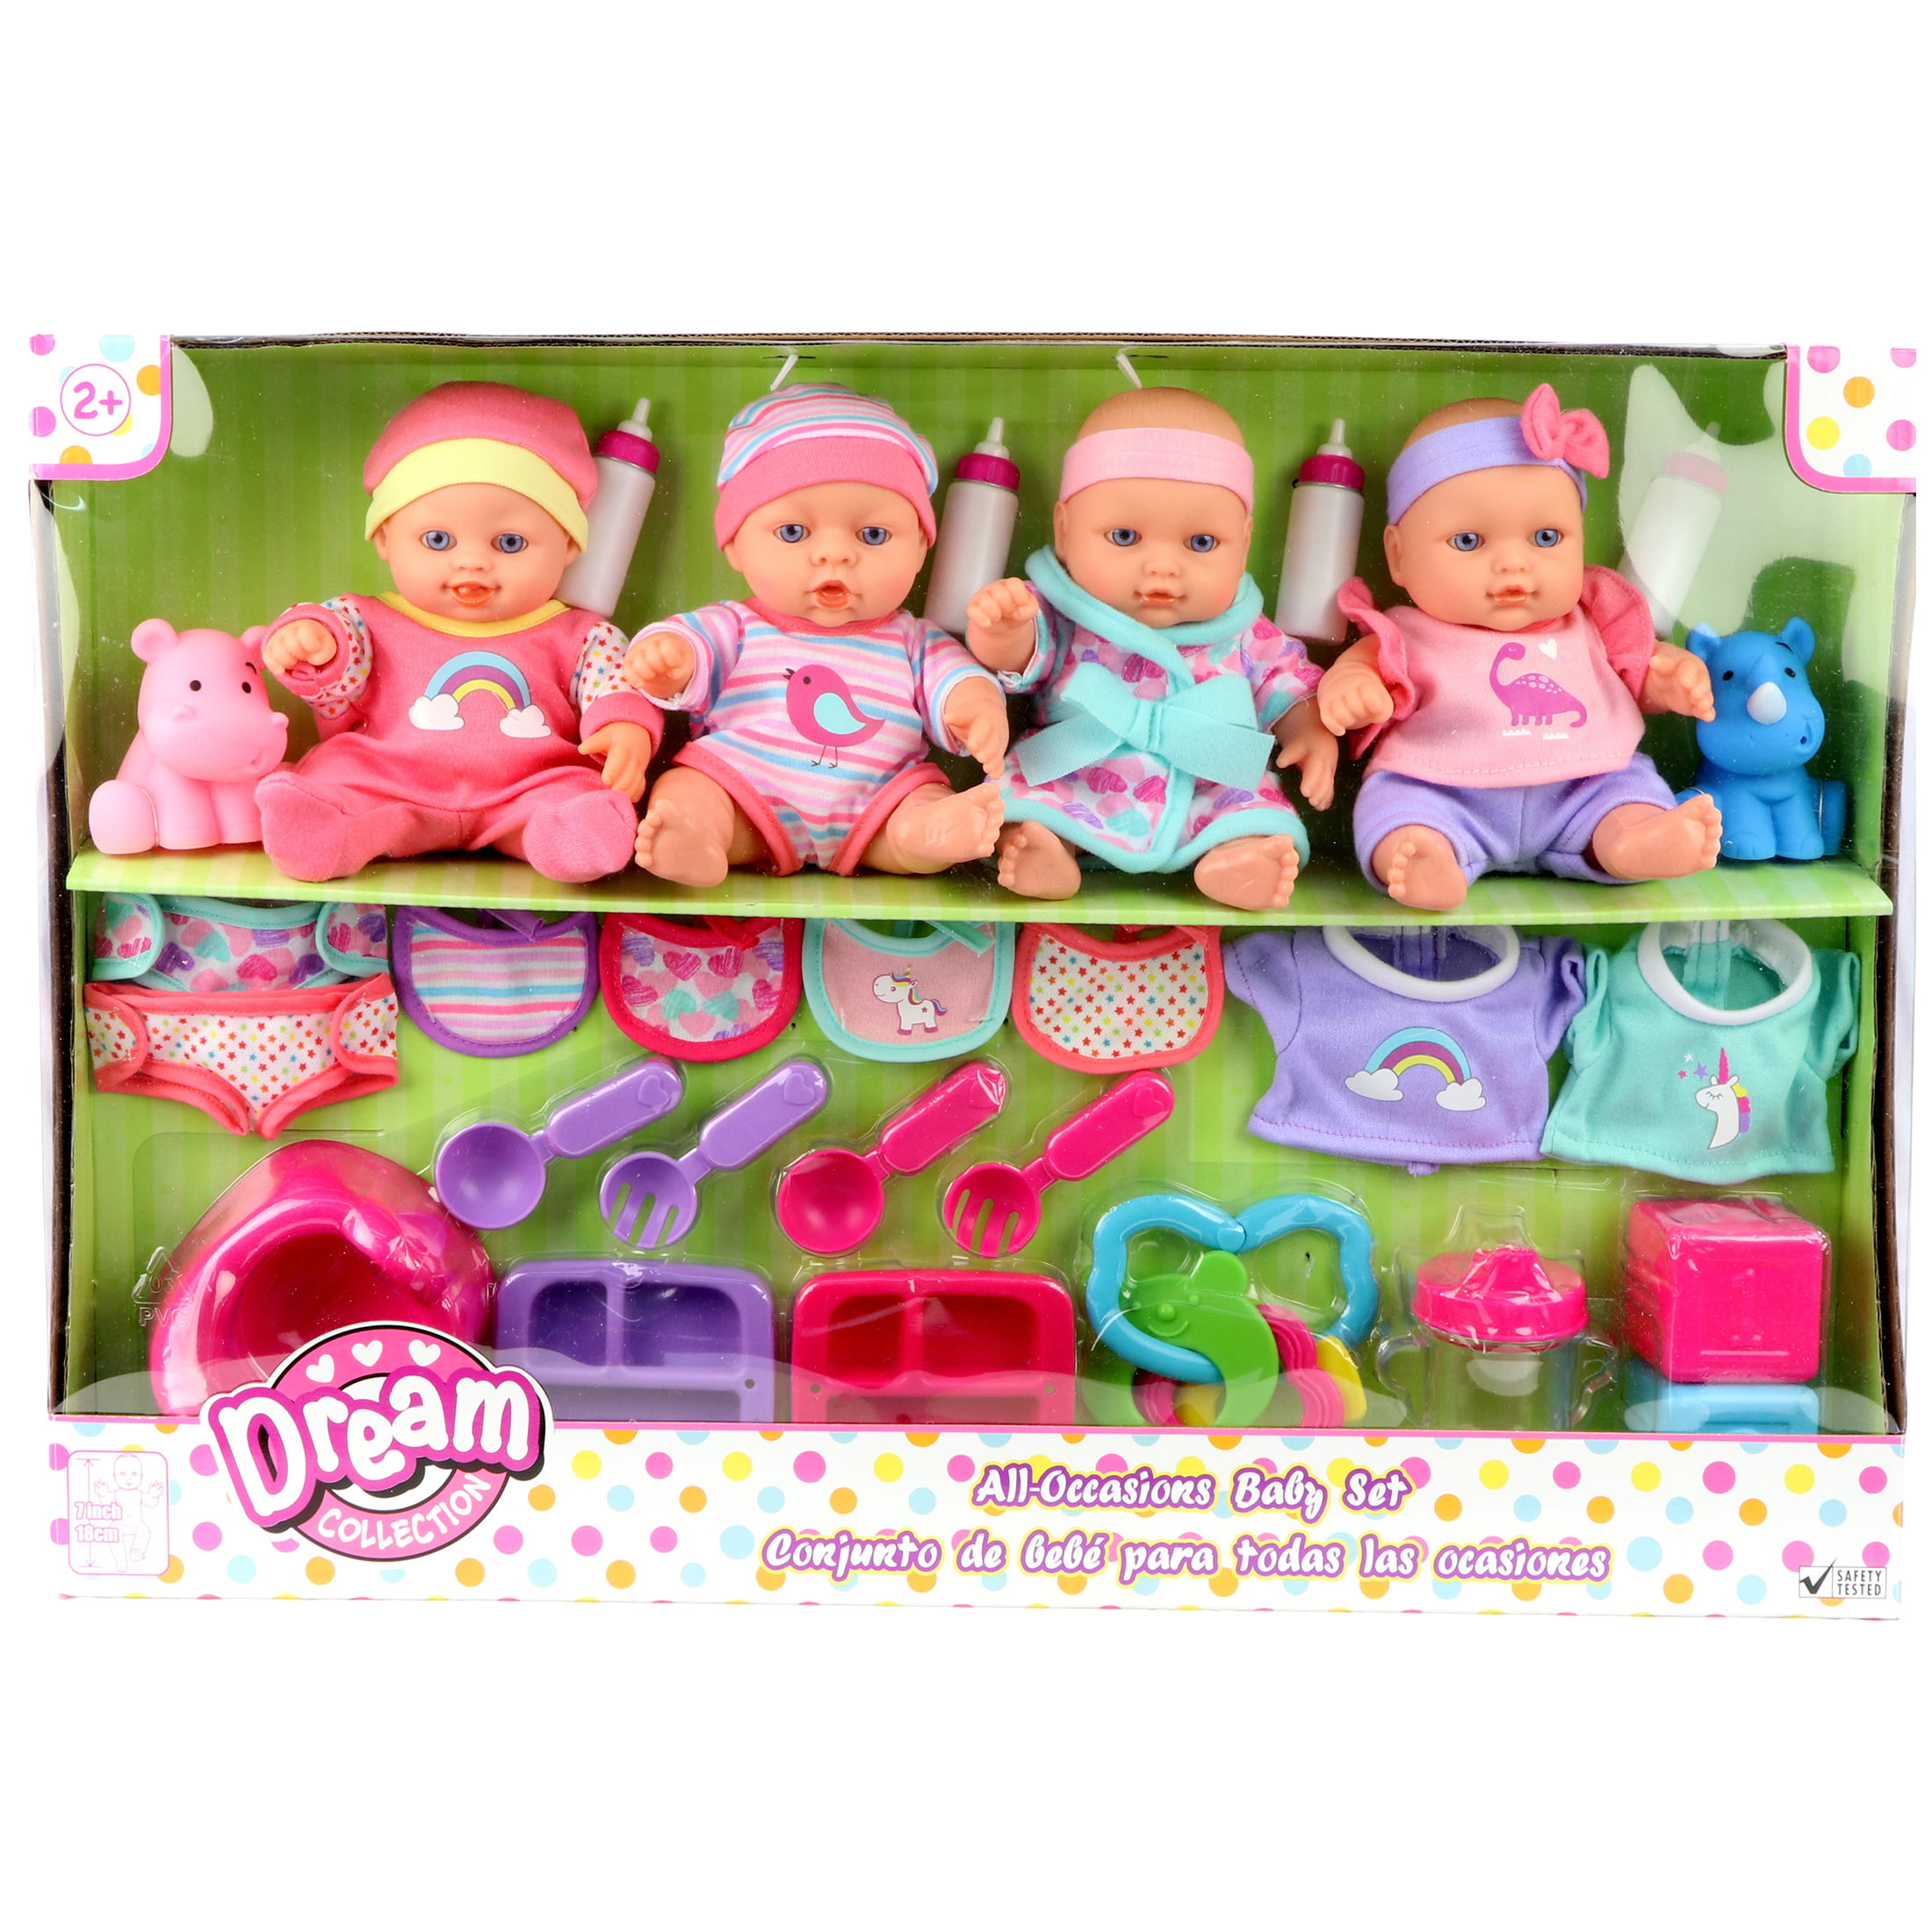 All-Occasions Baby Doll Set 